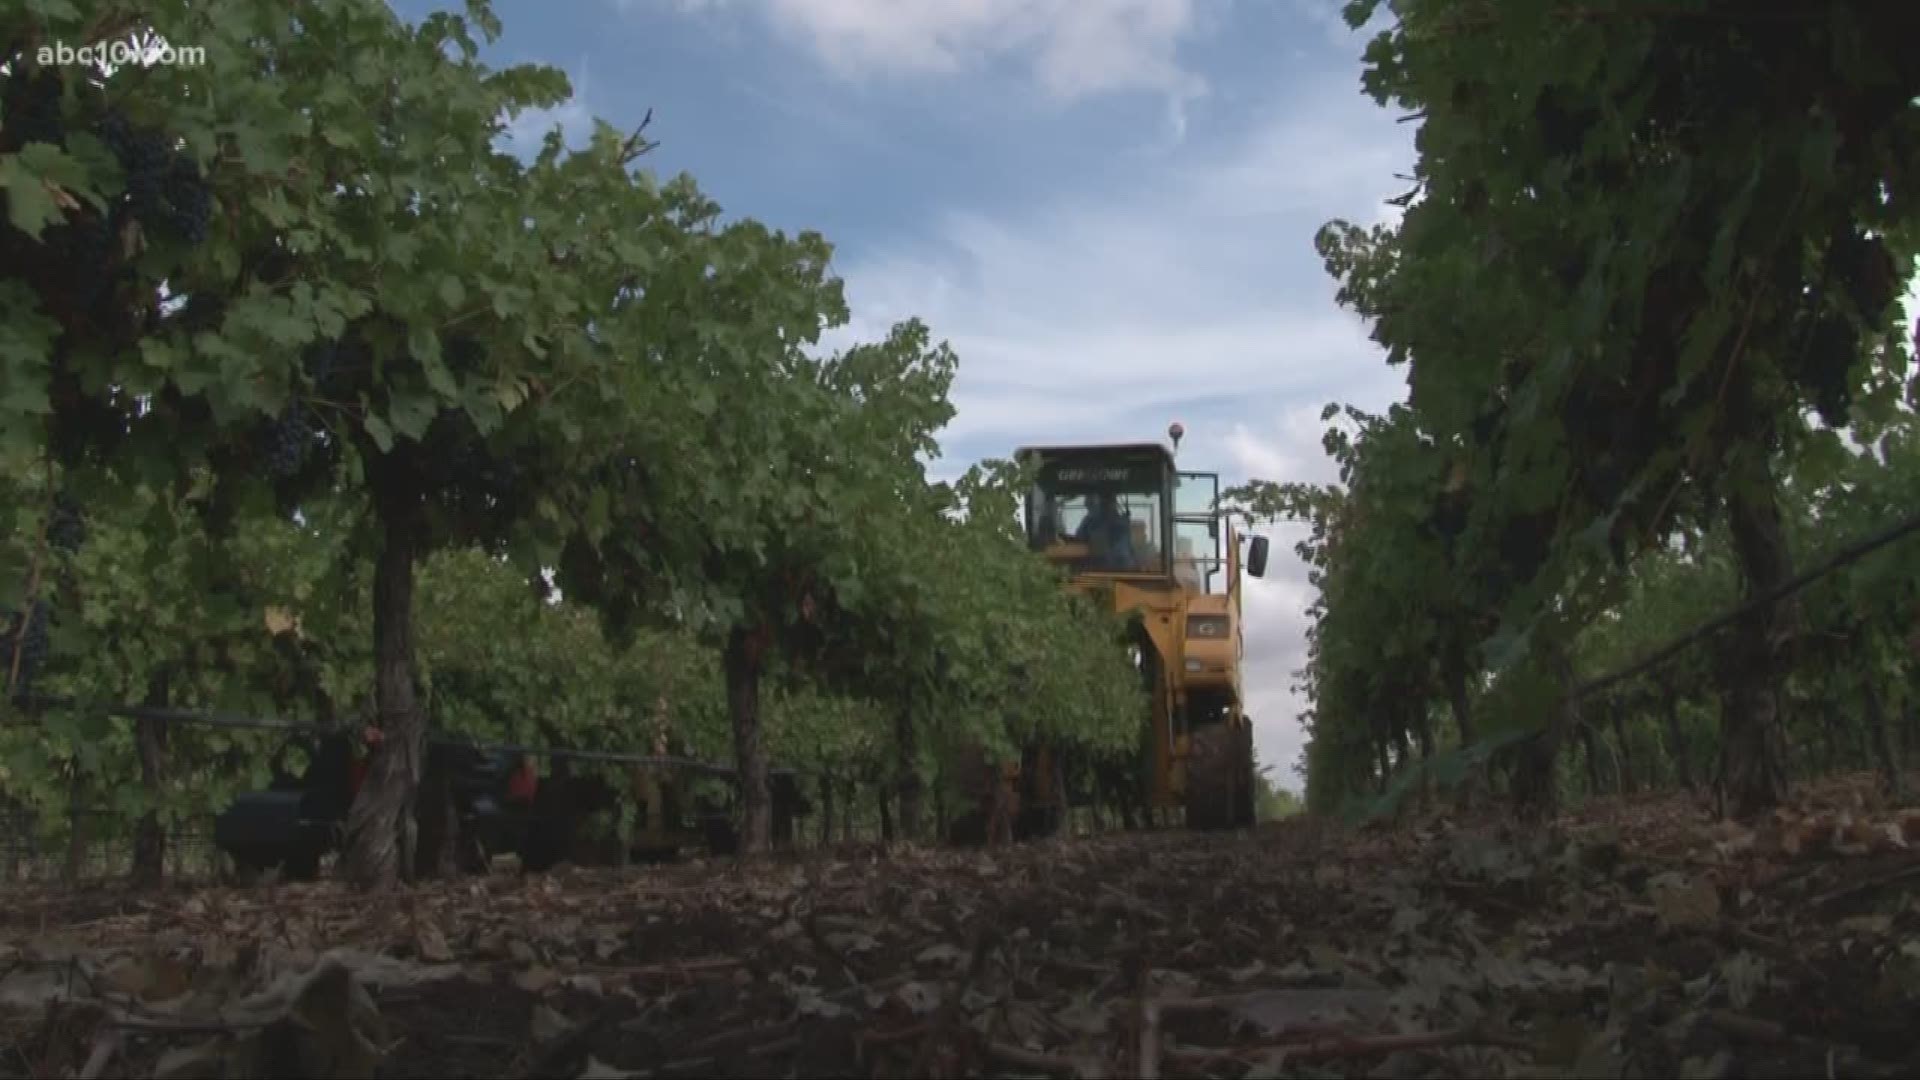 The early October rain is not good for grape growers, who are right in the middle of harvest season.